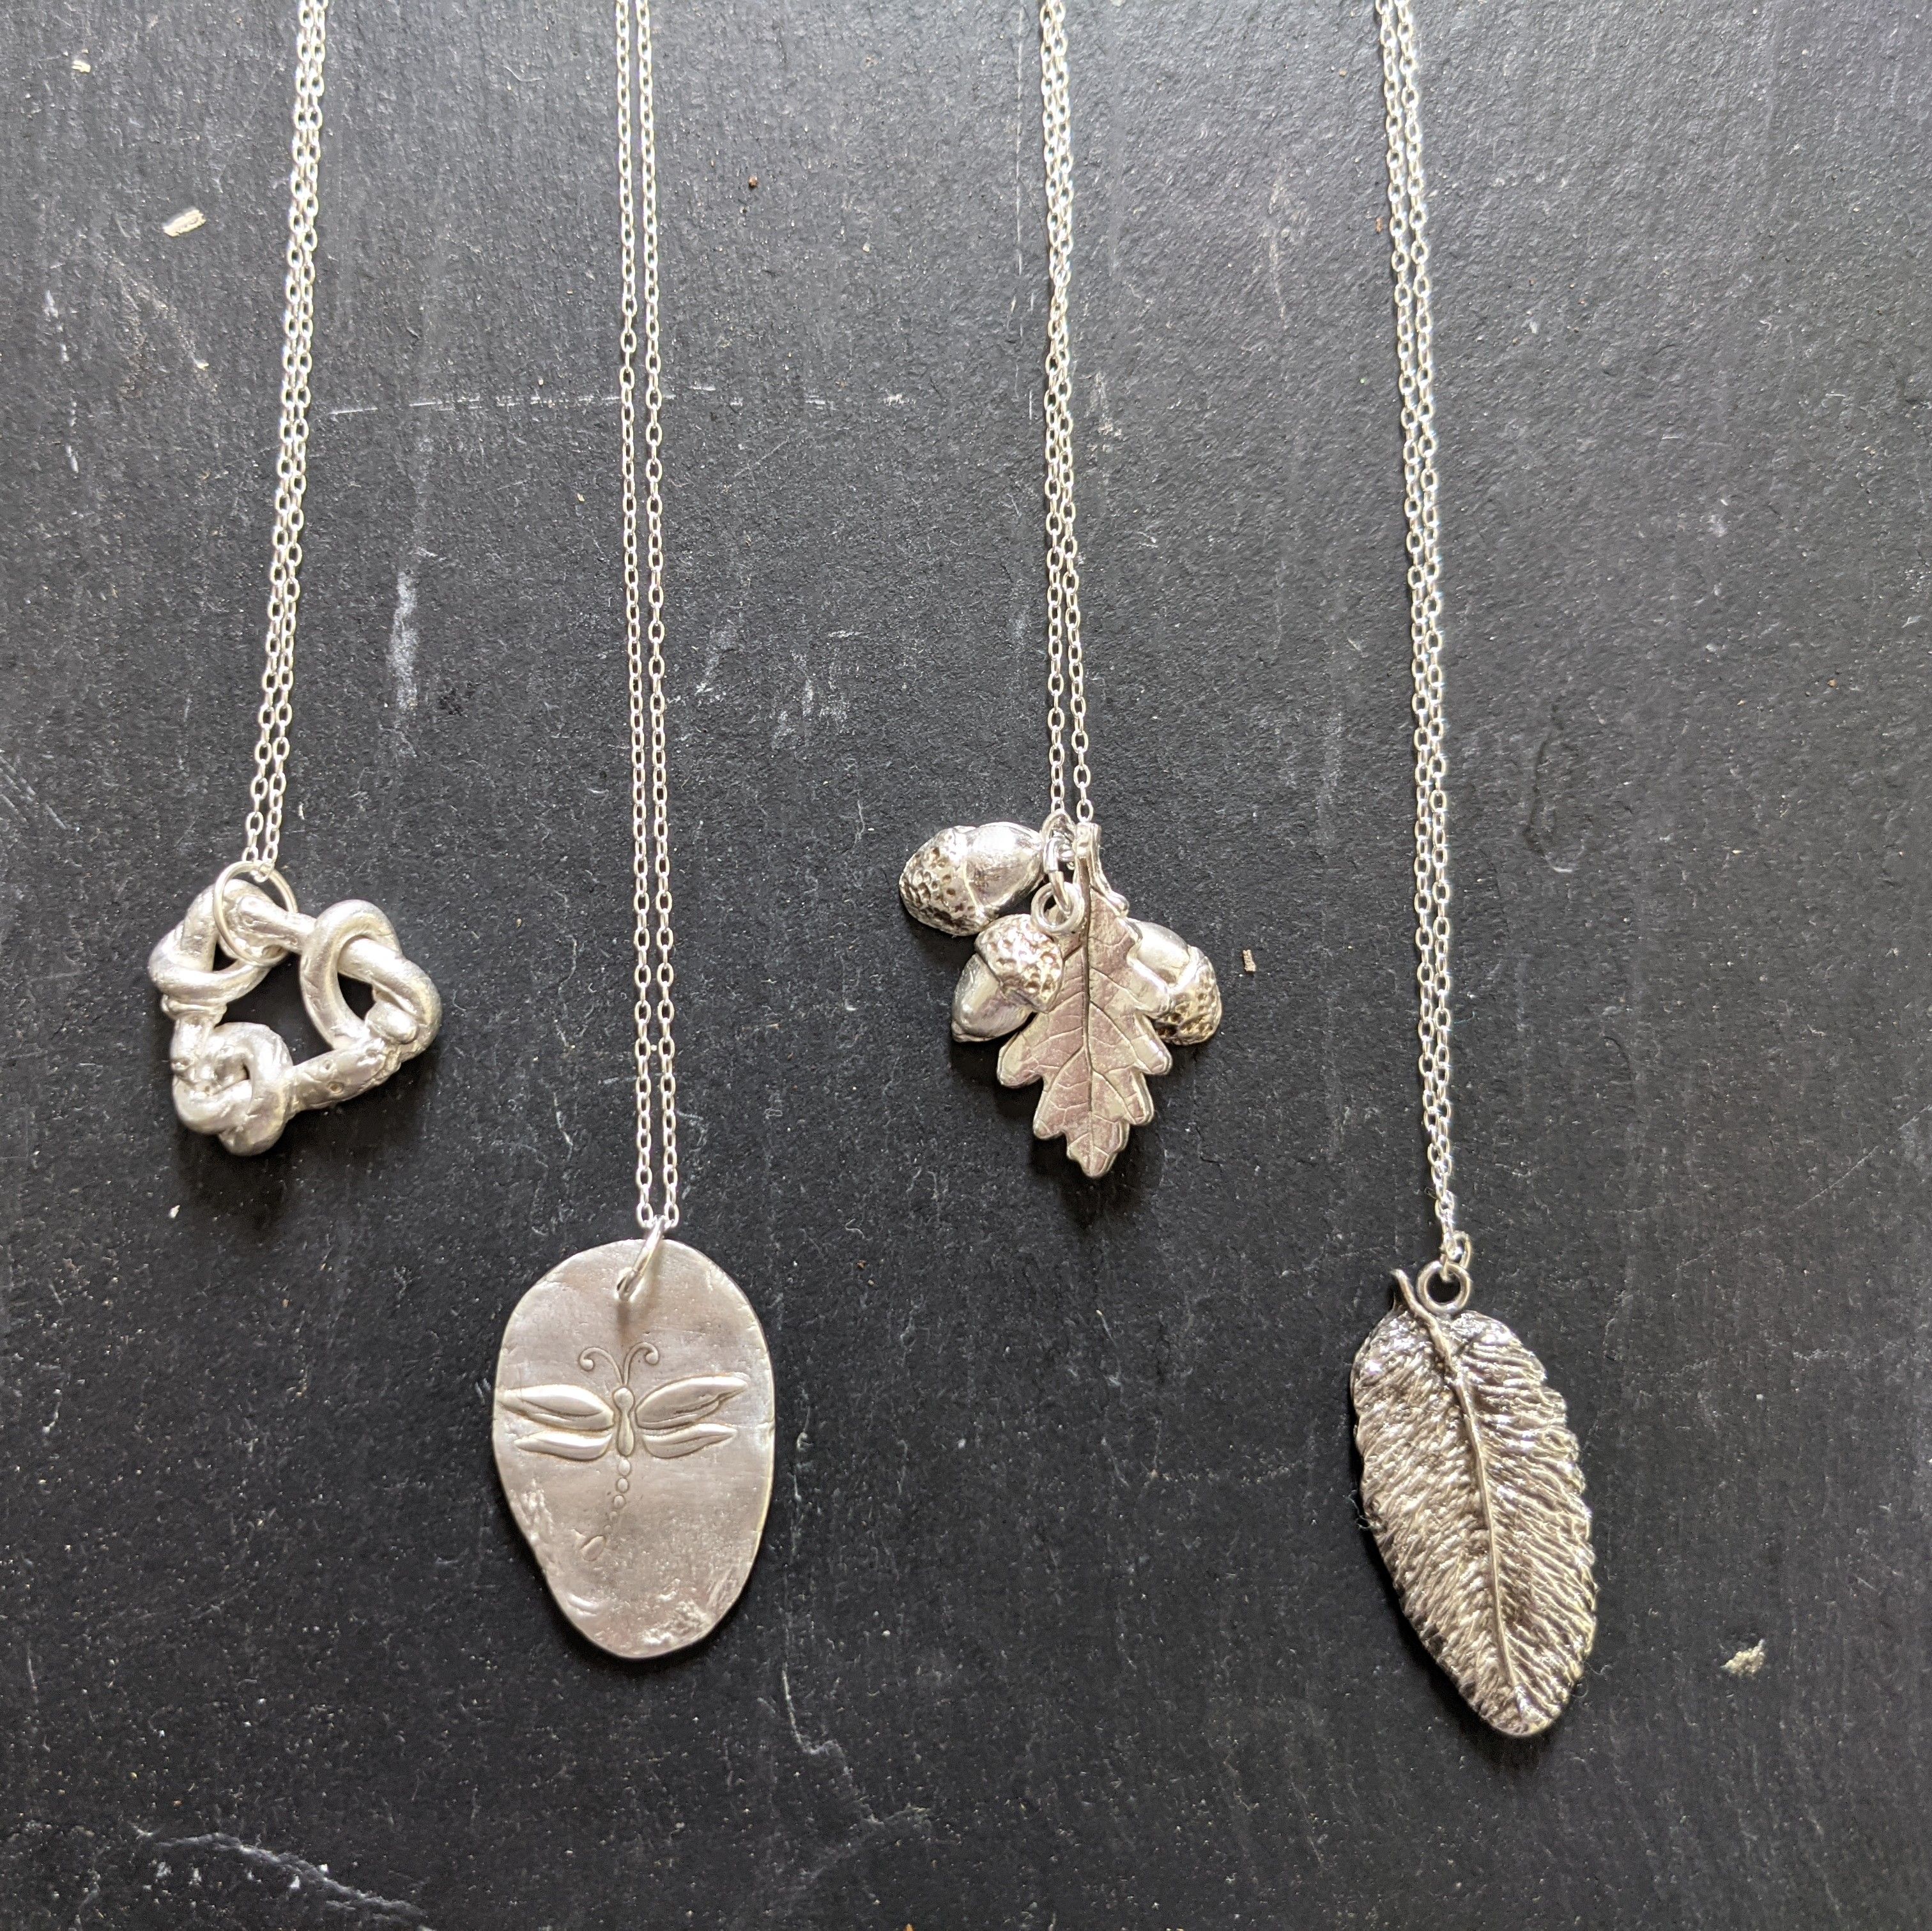 Beginners silver clay full day workshop - make a pendant or drop earrings